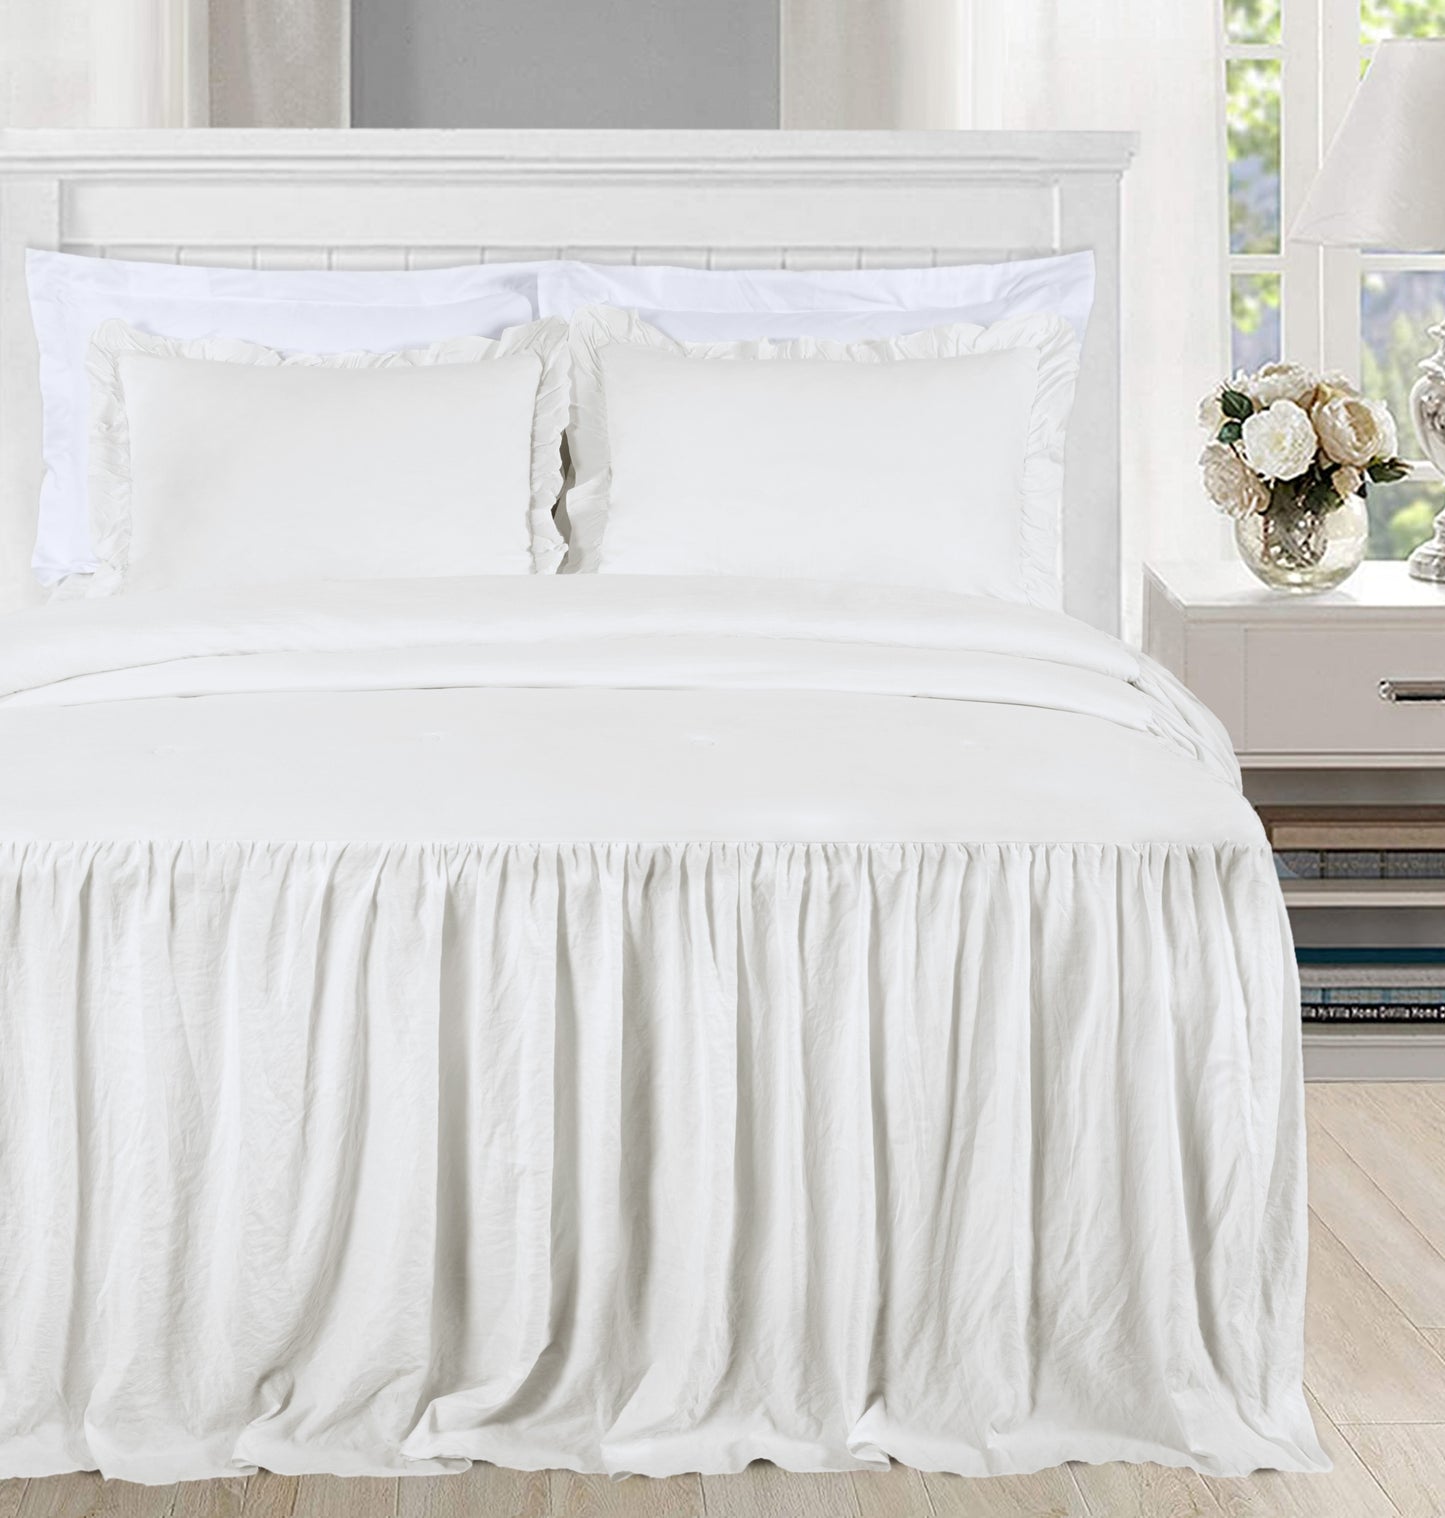 Sinclair French Country Chic Farmhouse Ruffle Skirt Bedspread Set